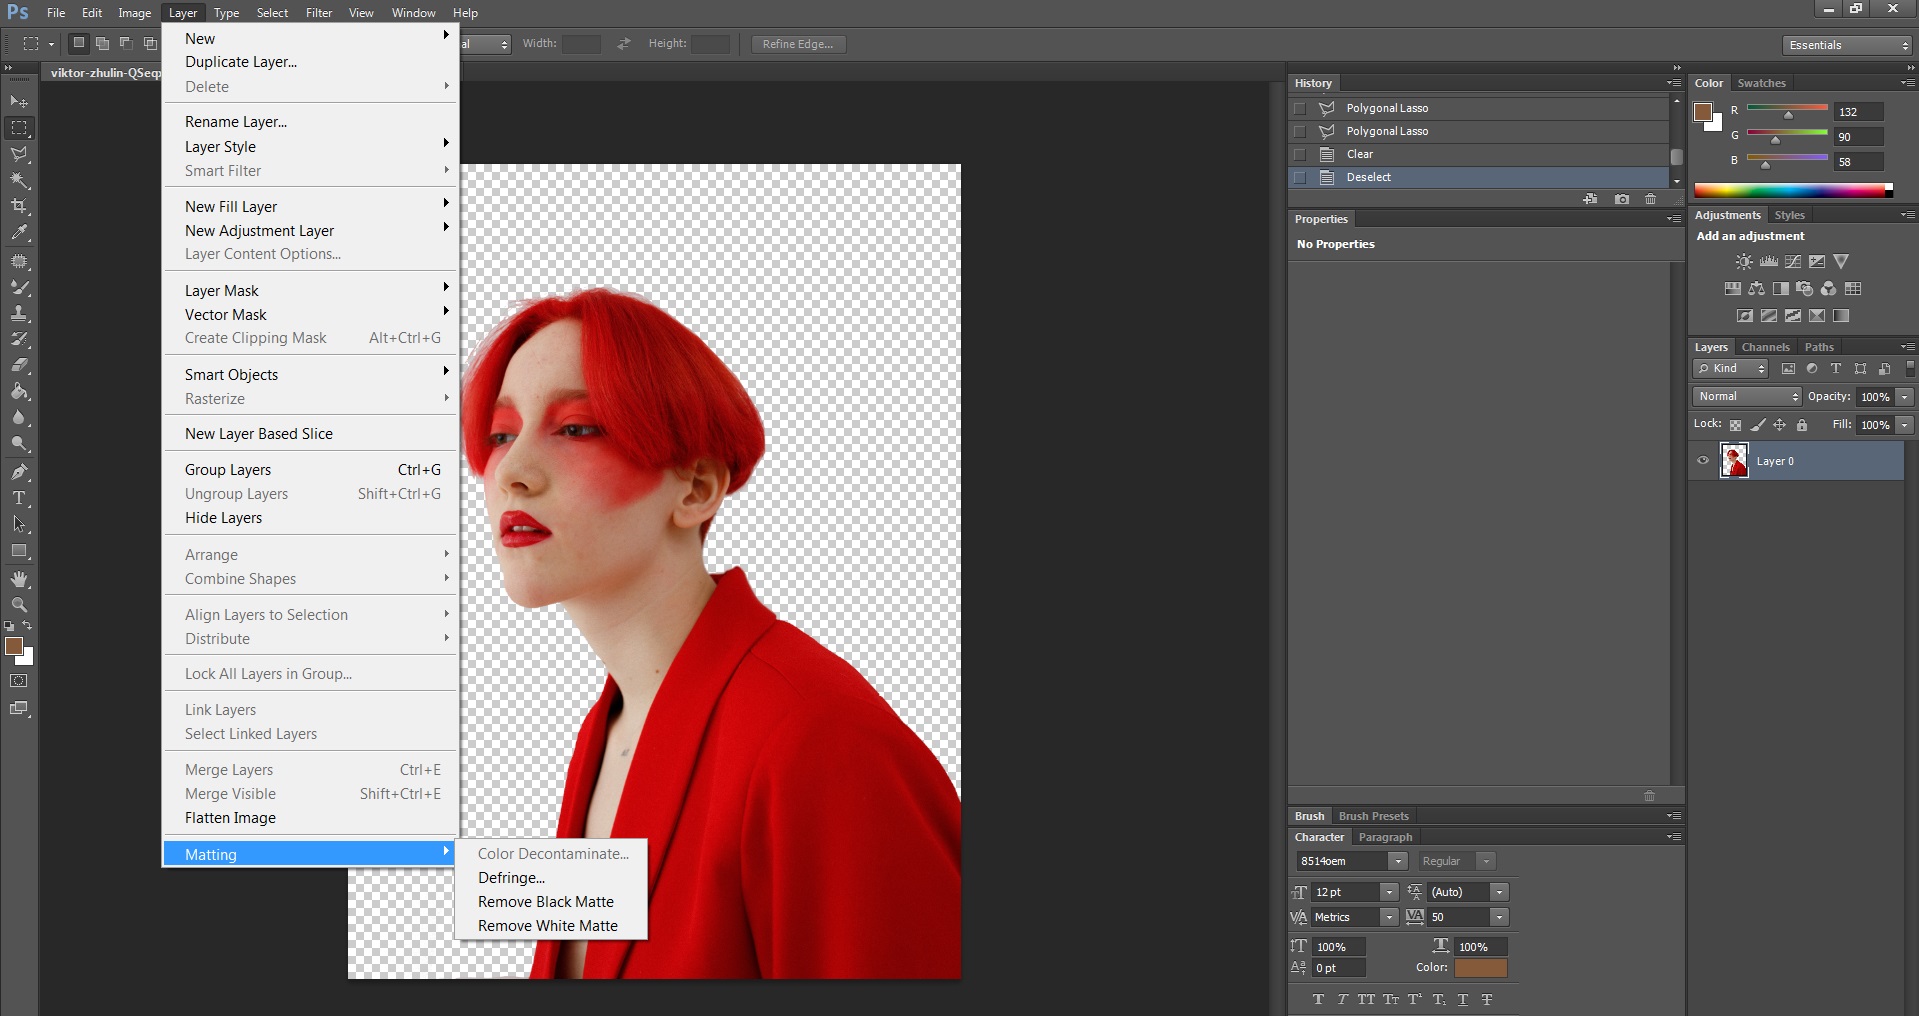 Sloved] How to Remove White Background in Photoshop